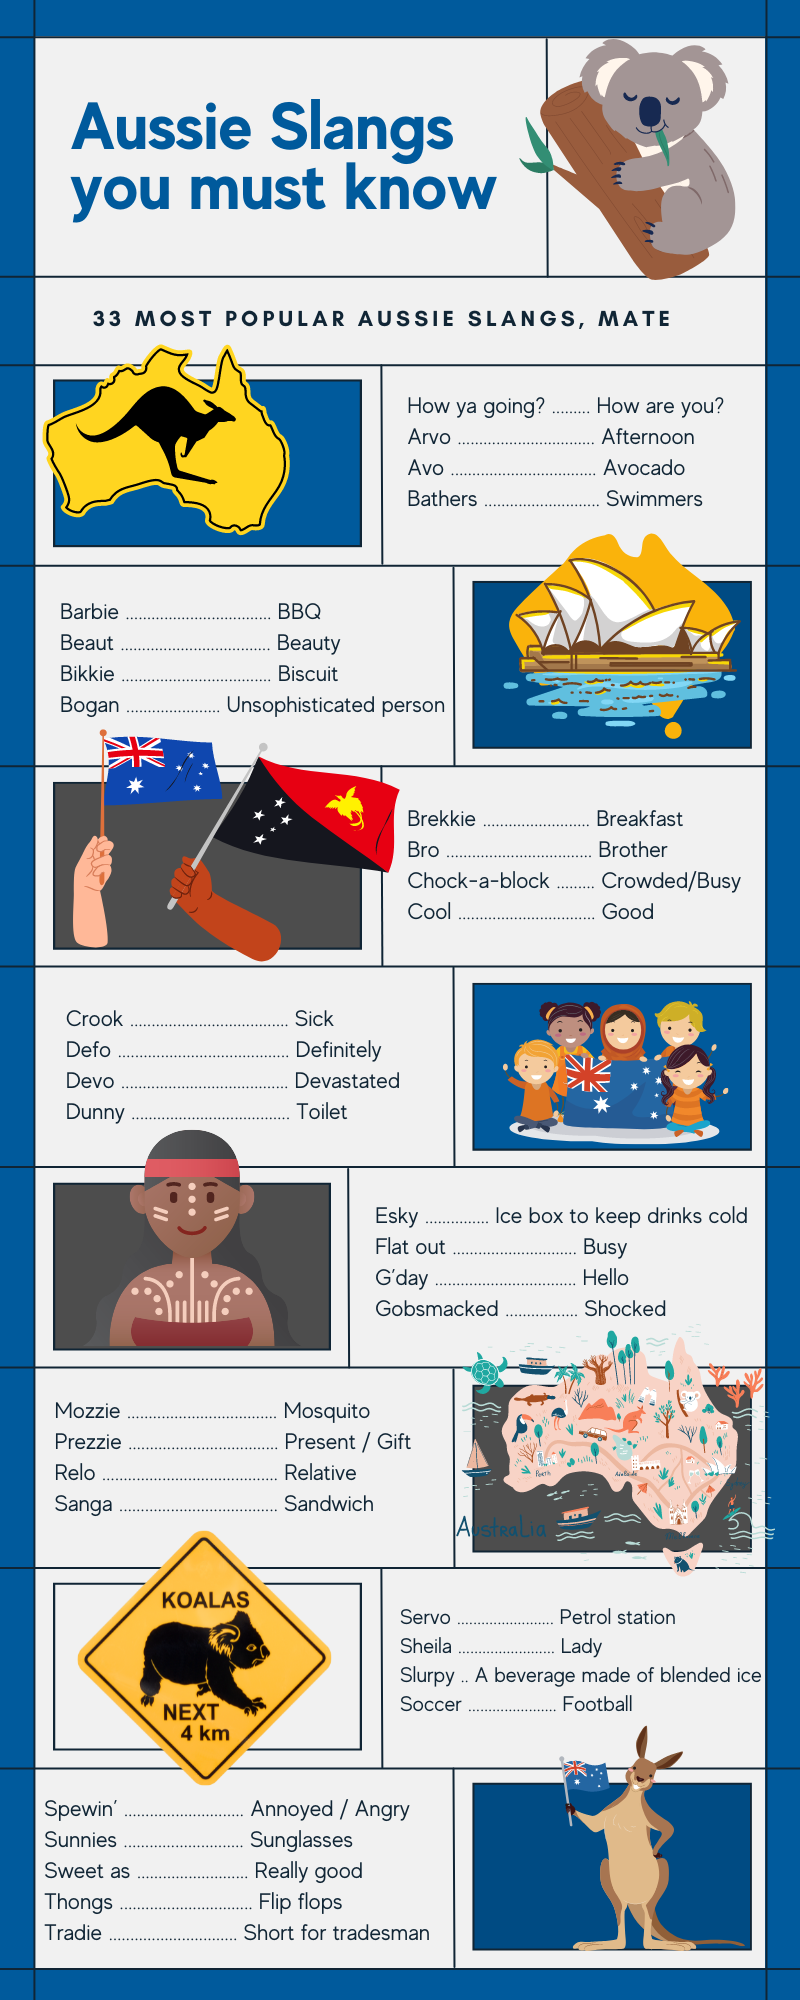 Your Guide To Australian Culture And Slang The University Of Adelaide College